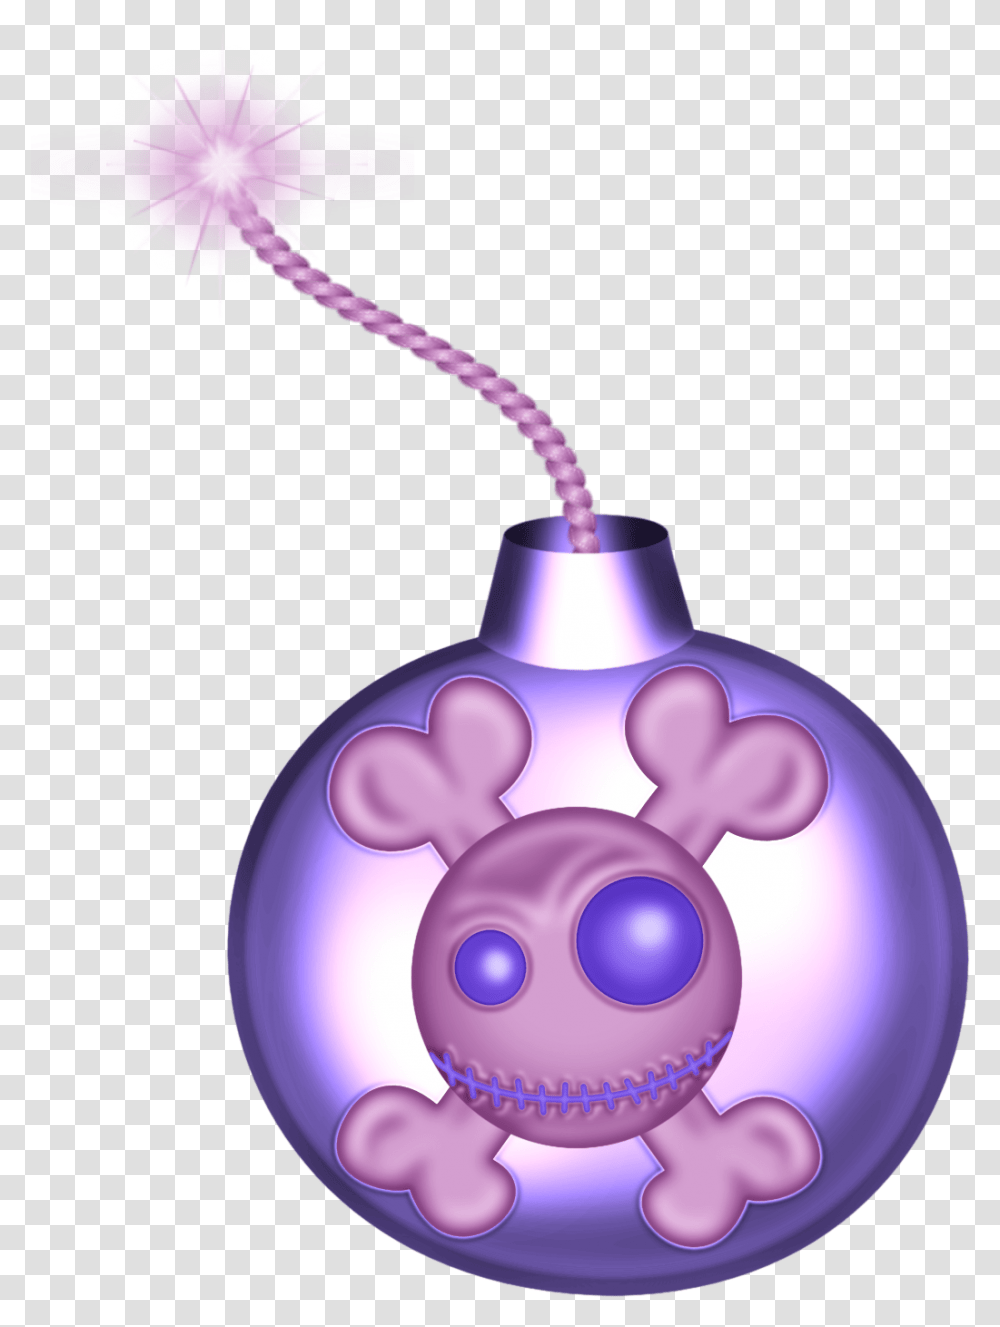 Freetoedit Fancy Girly Crazy Illustration, Ornament, Weapon, Weaponry, Bomb Transparent Png